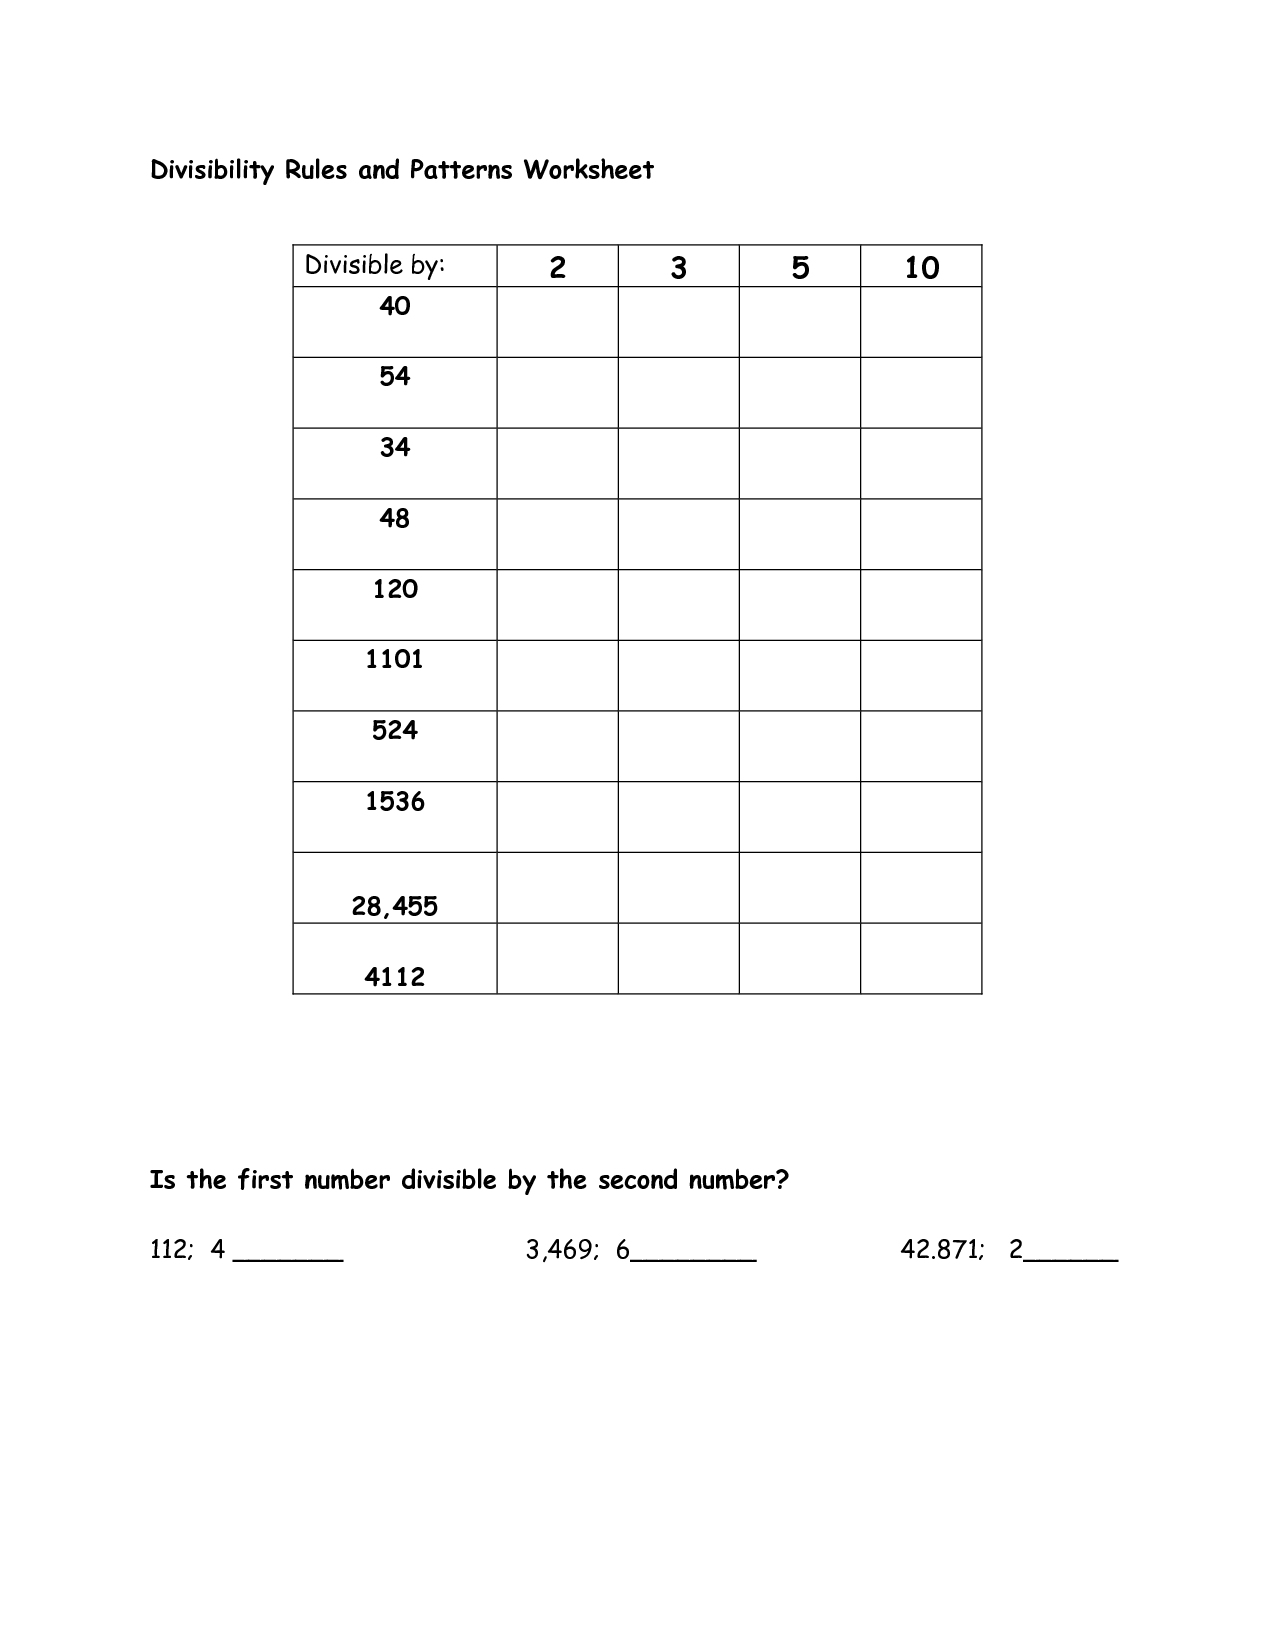 divisibility-rules-worksheet-free-upsky